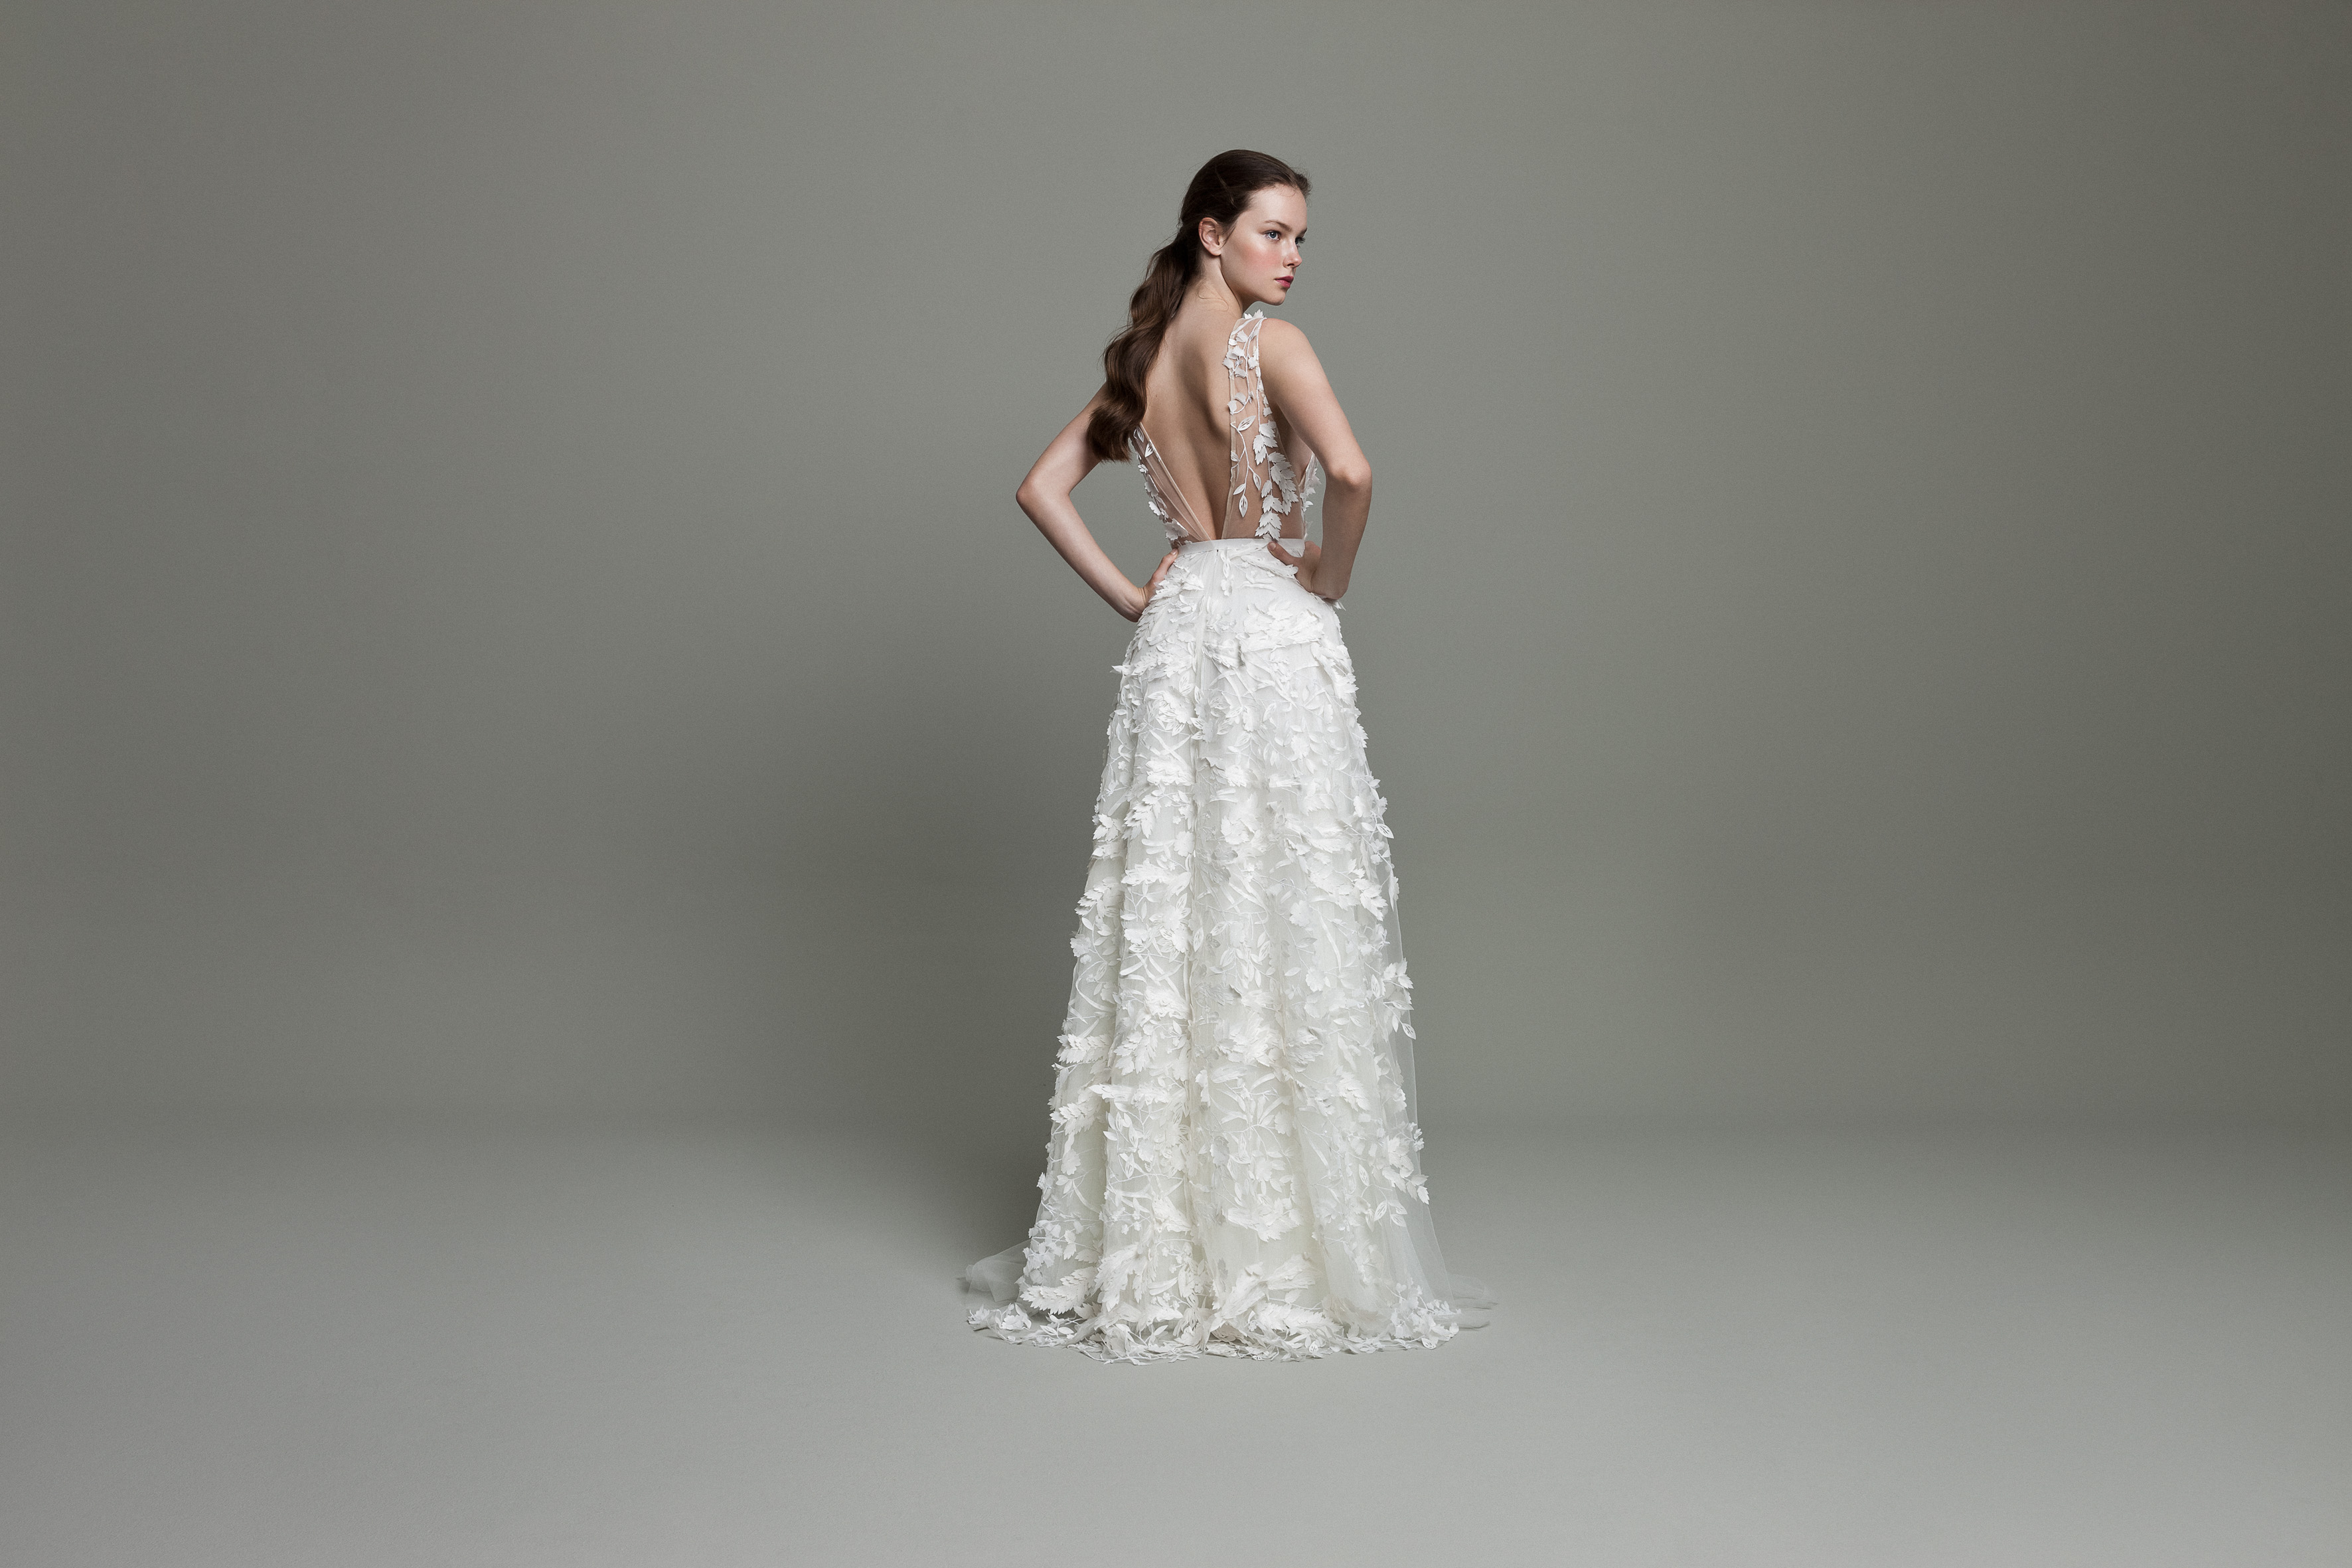 K'Mich Weddings - wedding planning - wedding dresses-white wedding dress - the whisper wedding collection - Daalarna Couture